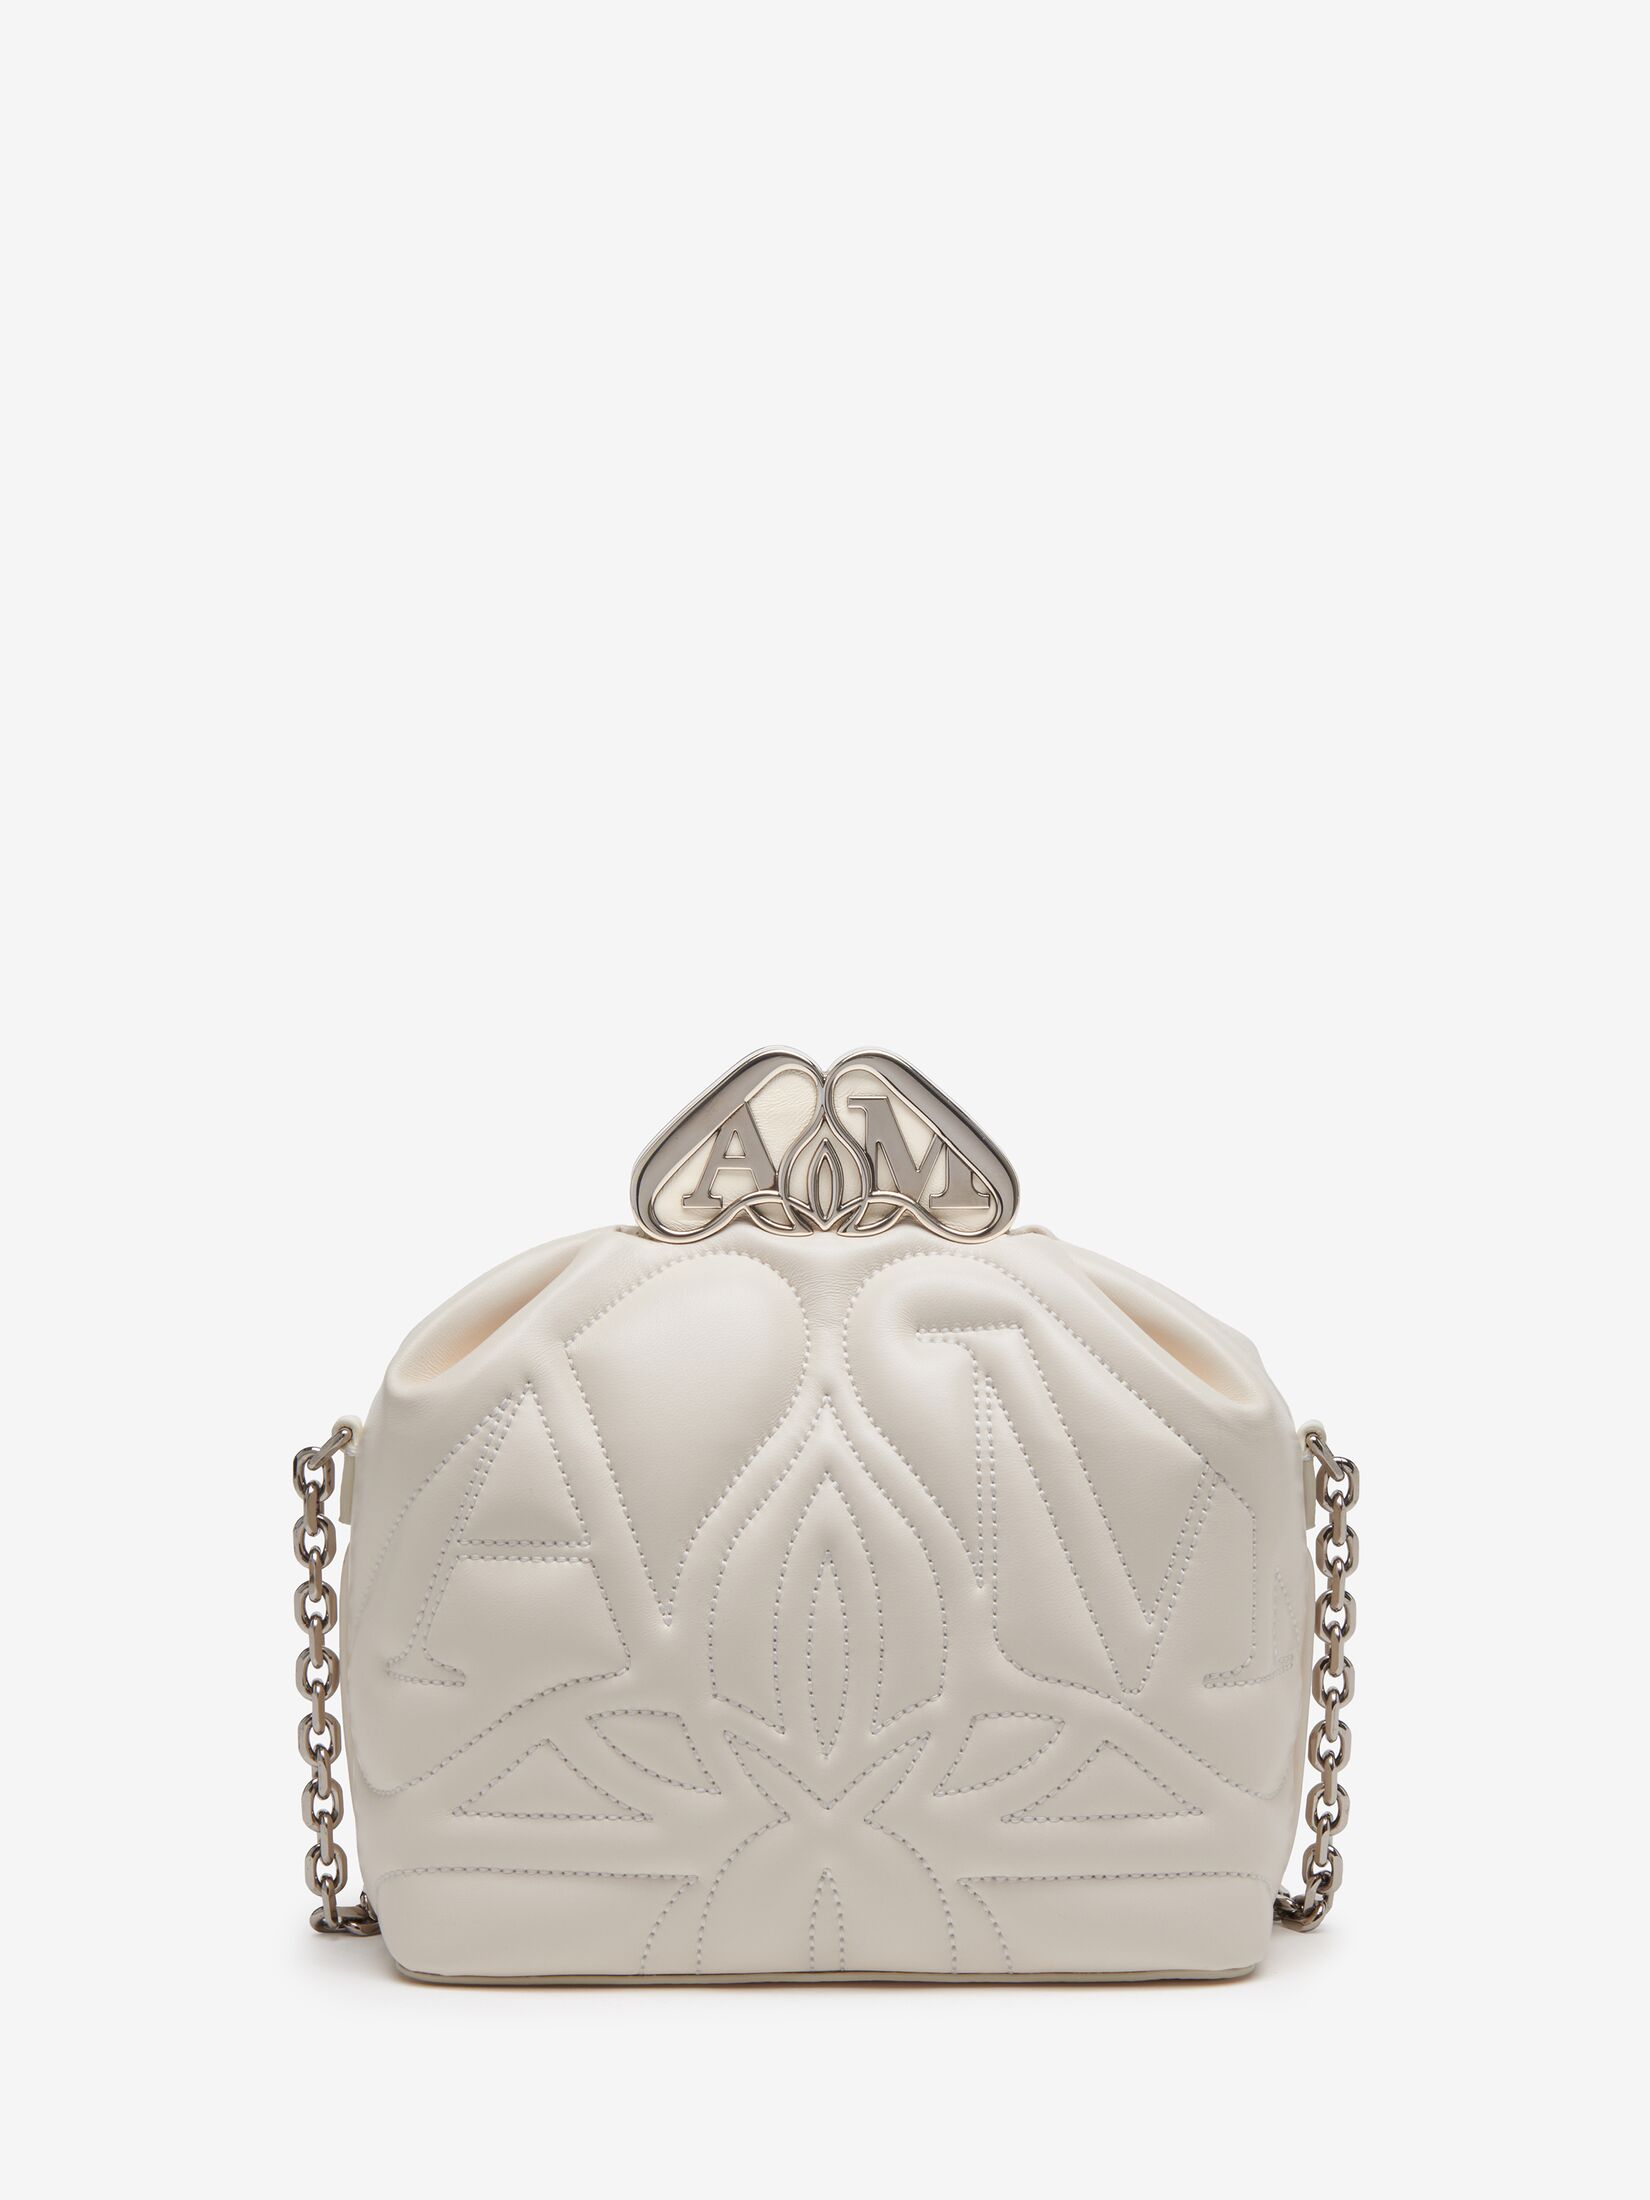 The Seal Box in Soft ivory | Alexander McQueen US